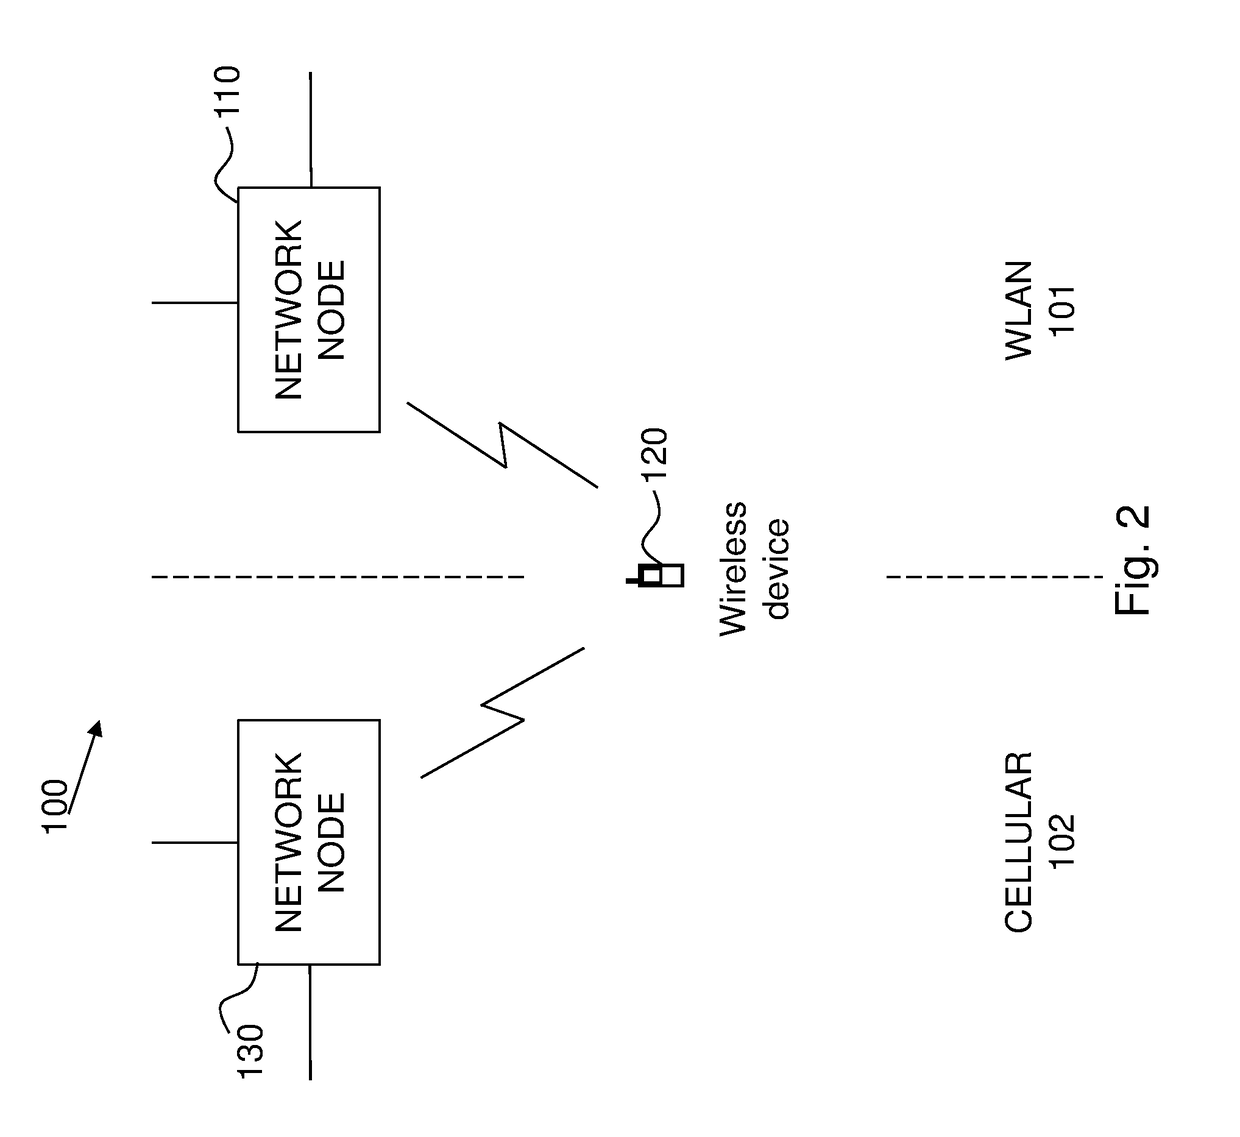 Method in a wireless communication network for notifying a communication device that context storing is employed in the network